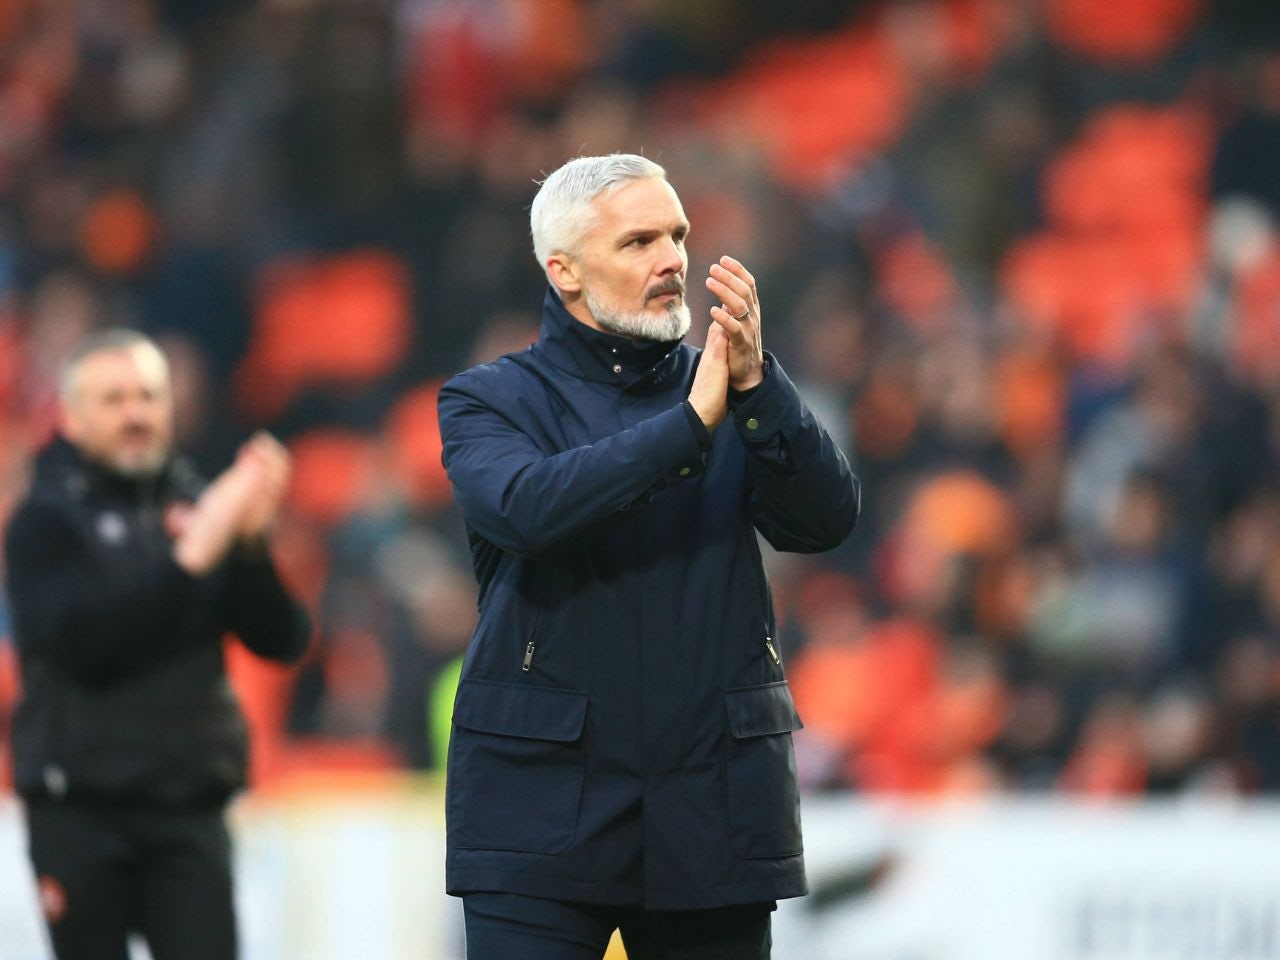 Preview: Buckie Thistle vs. Dundee United - prediction, team news, lineups